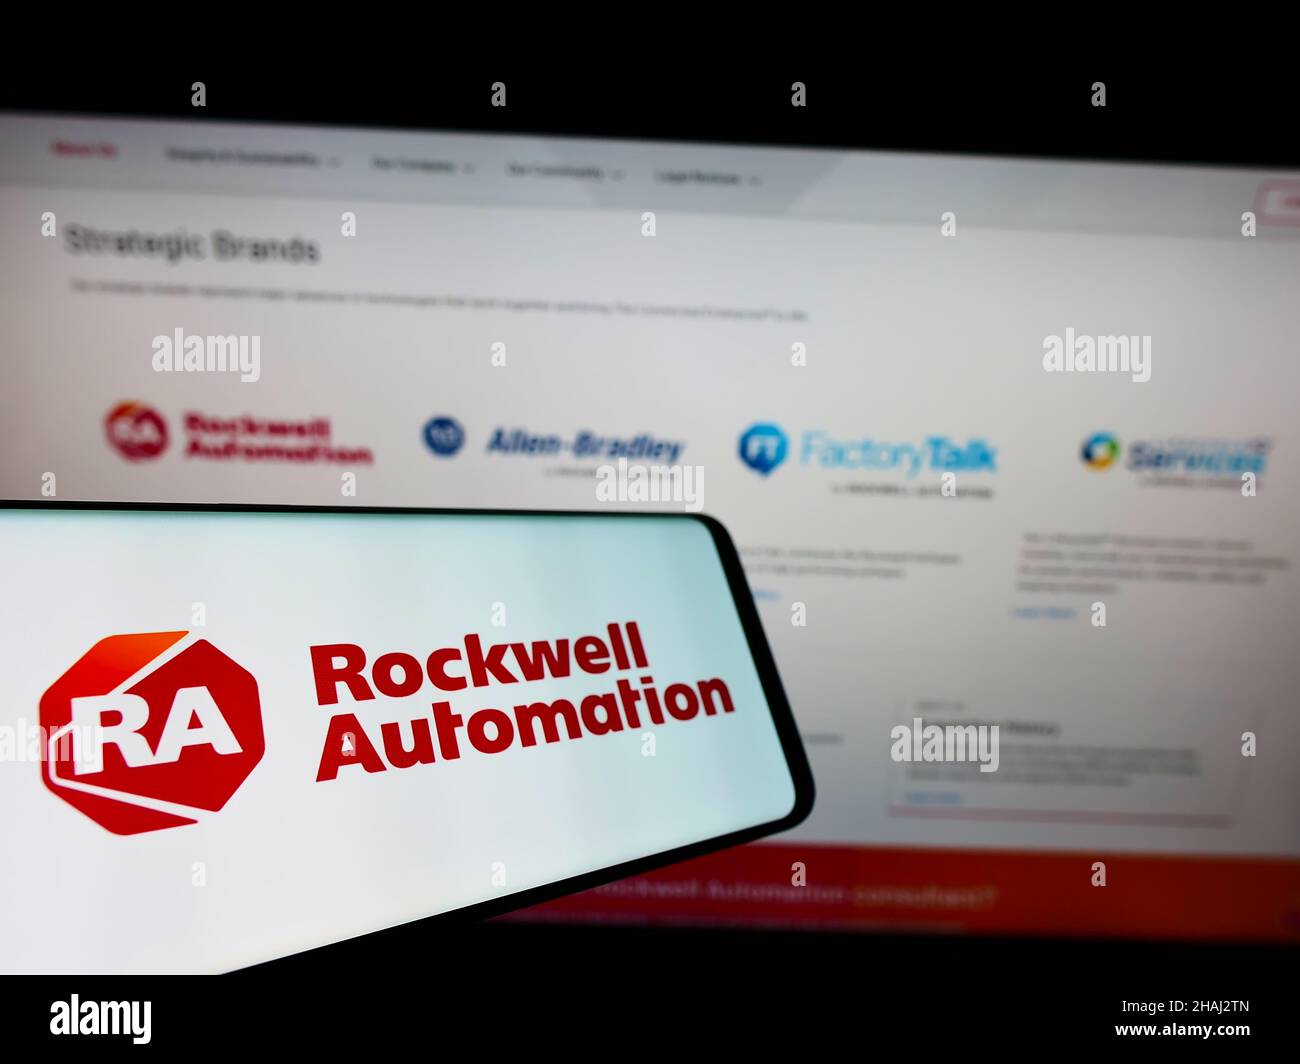 Mobile phone with logo of American company Rockwell Automation Inc. on screen in front of business website. Focus on left of phone display. Stock Photo